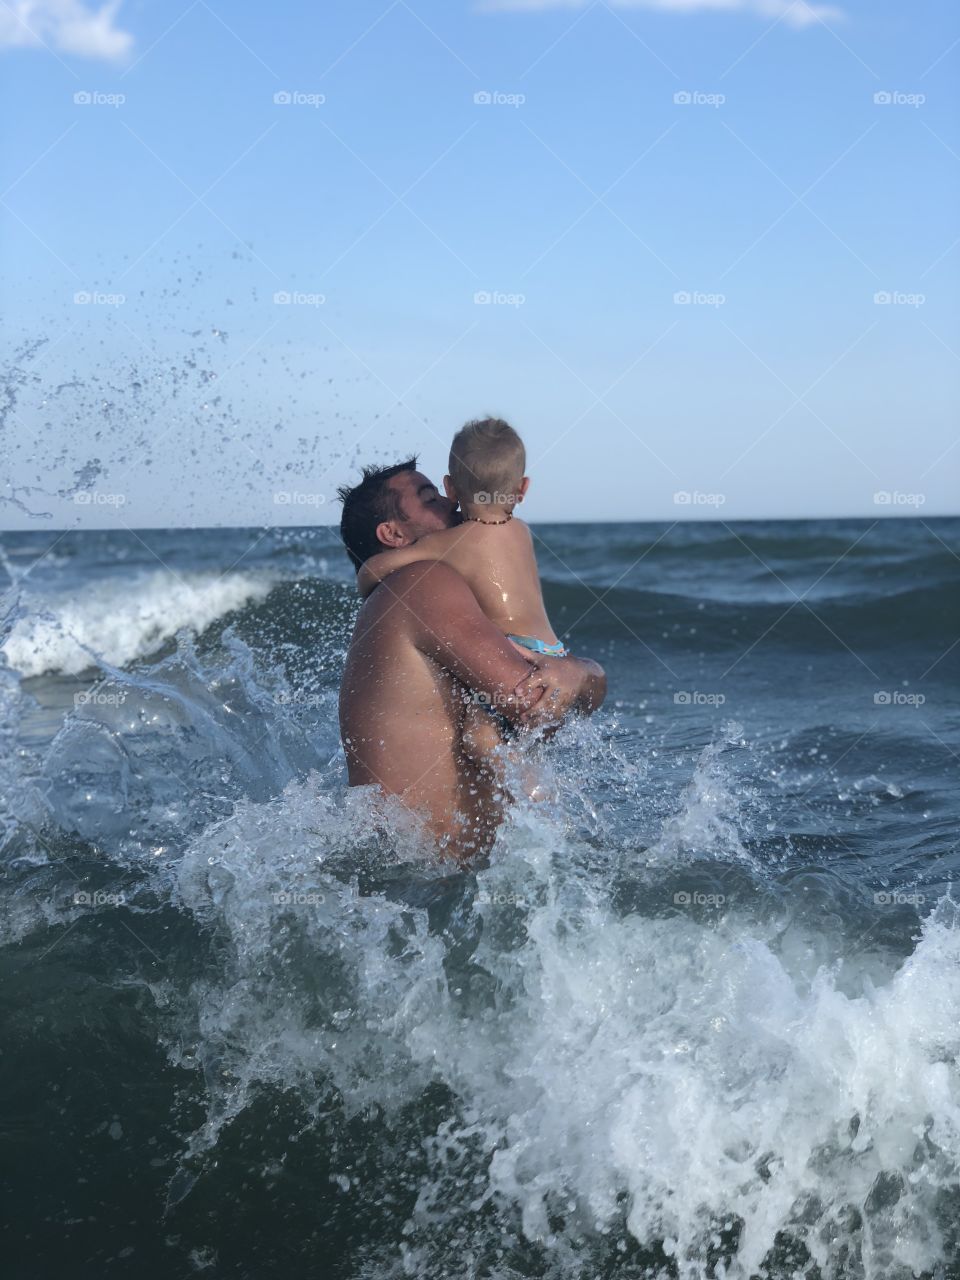 Father-son splashing in the waves on the SC shores. (Isle of Palms). 